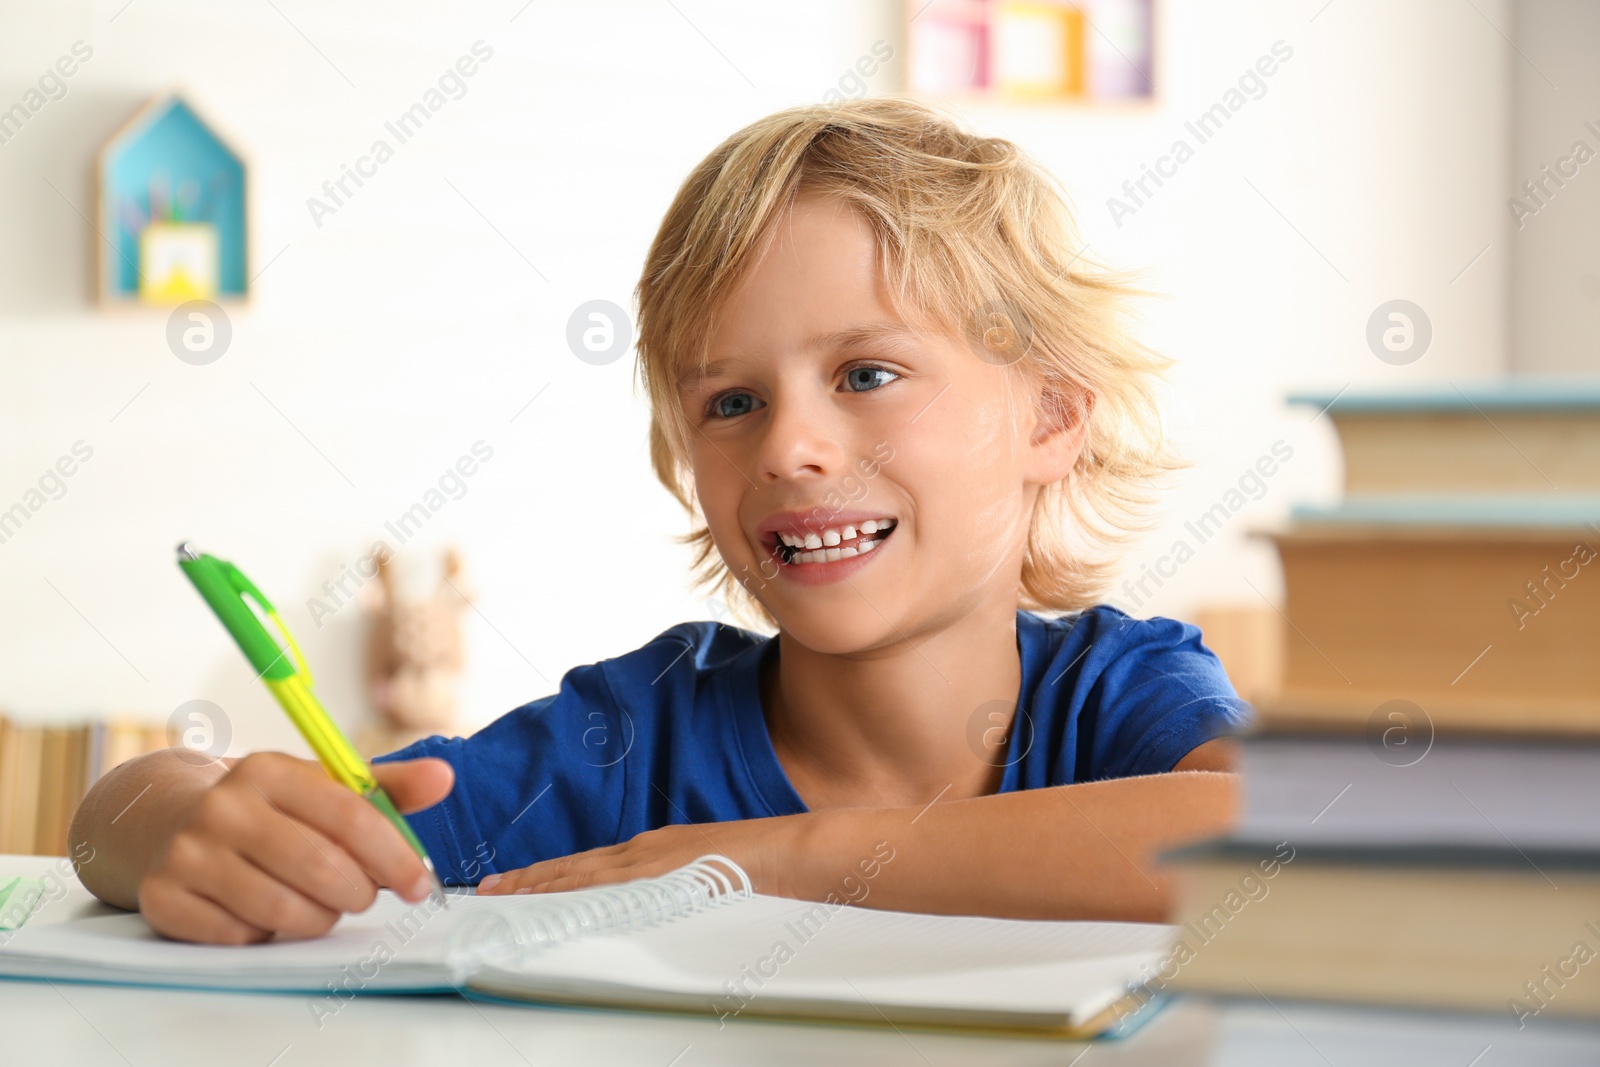 Photo of Little boy doing homework at table indoors